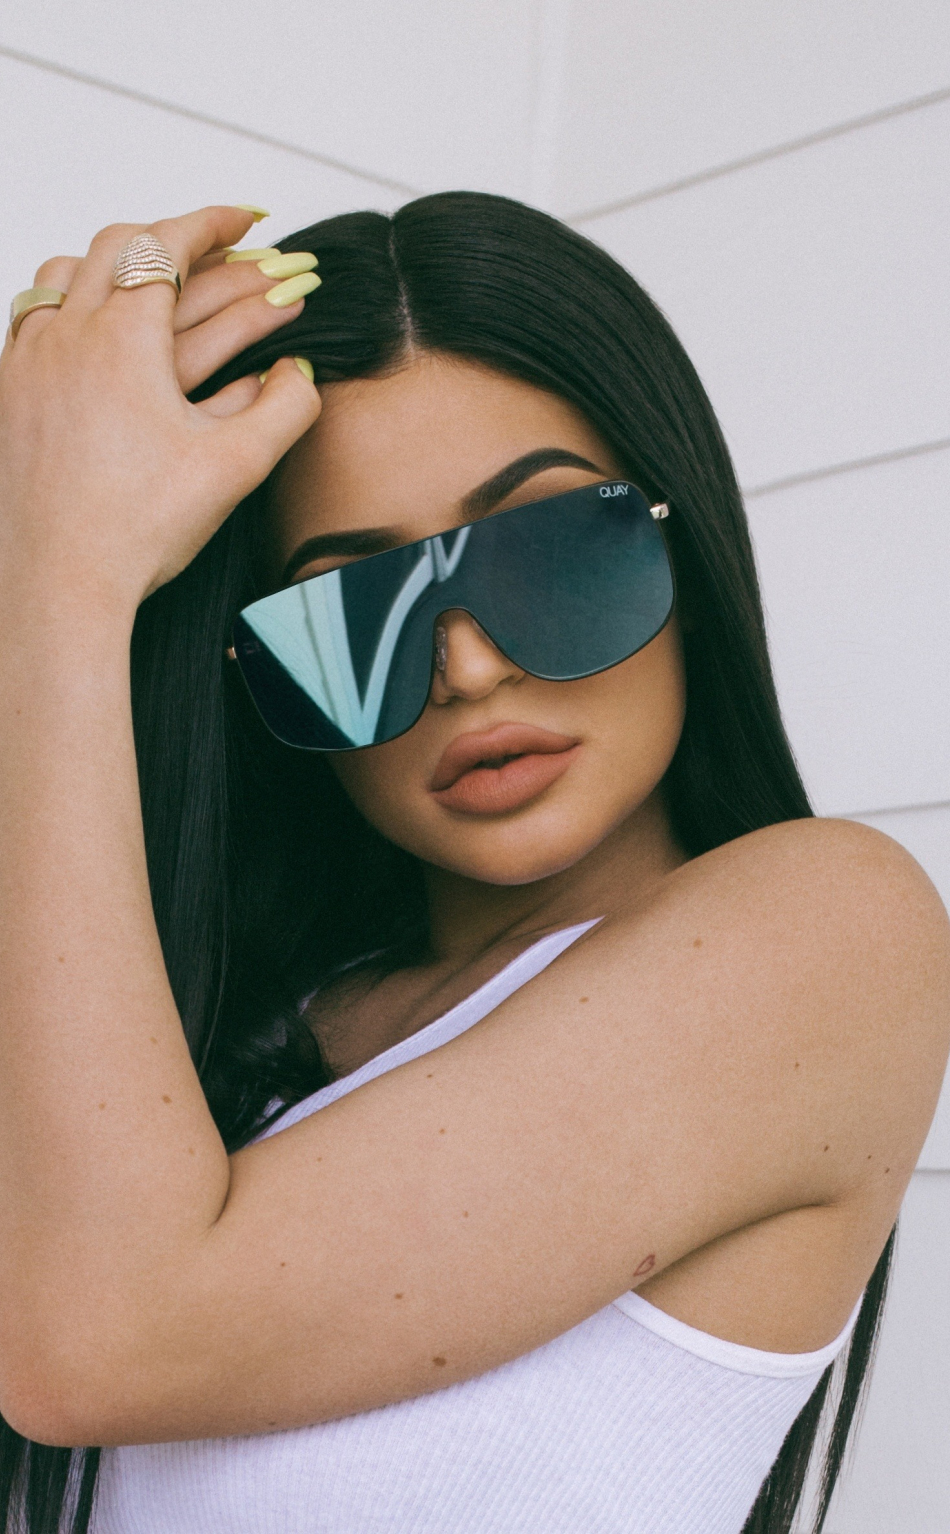 Download 950x1534 wallpaper kylie jenner, 2018, quay, x drop two ...